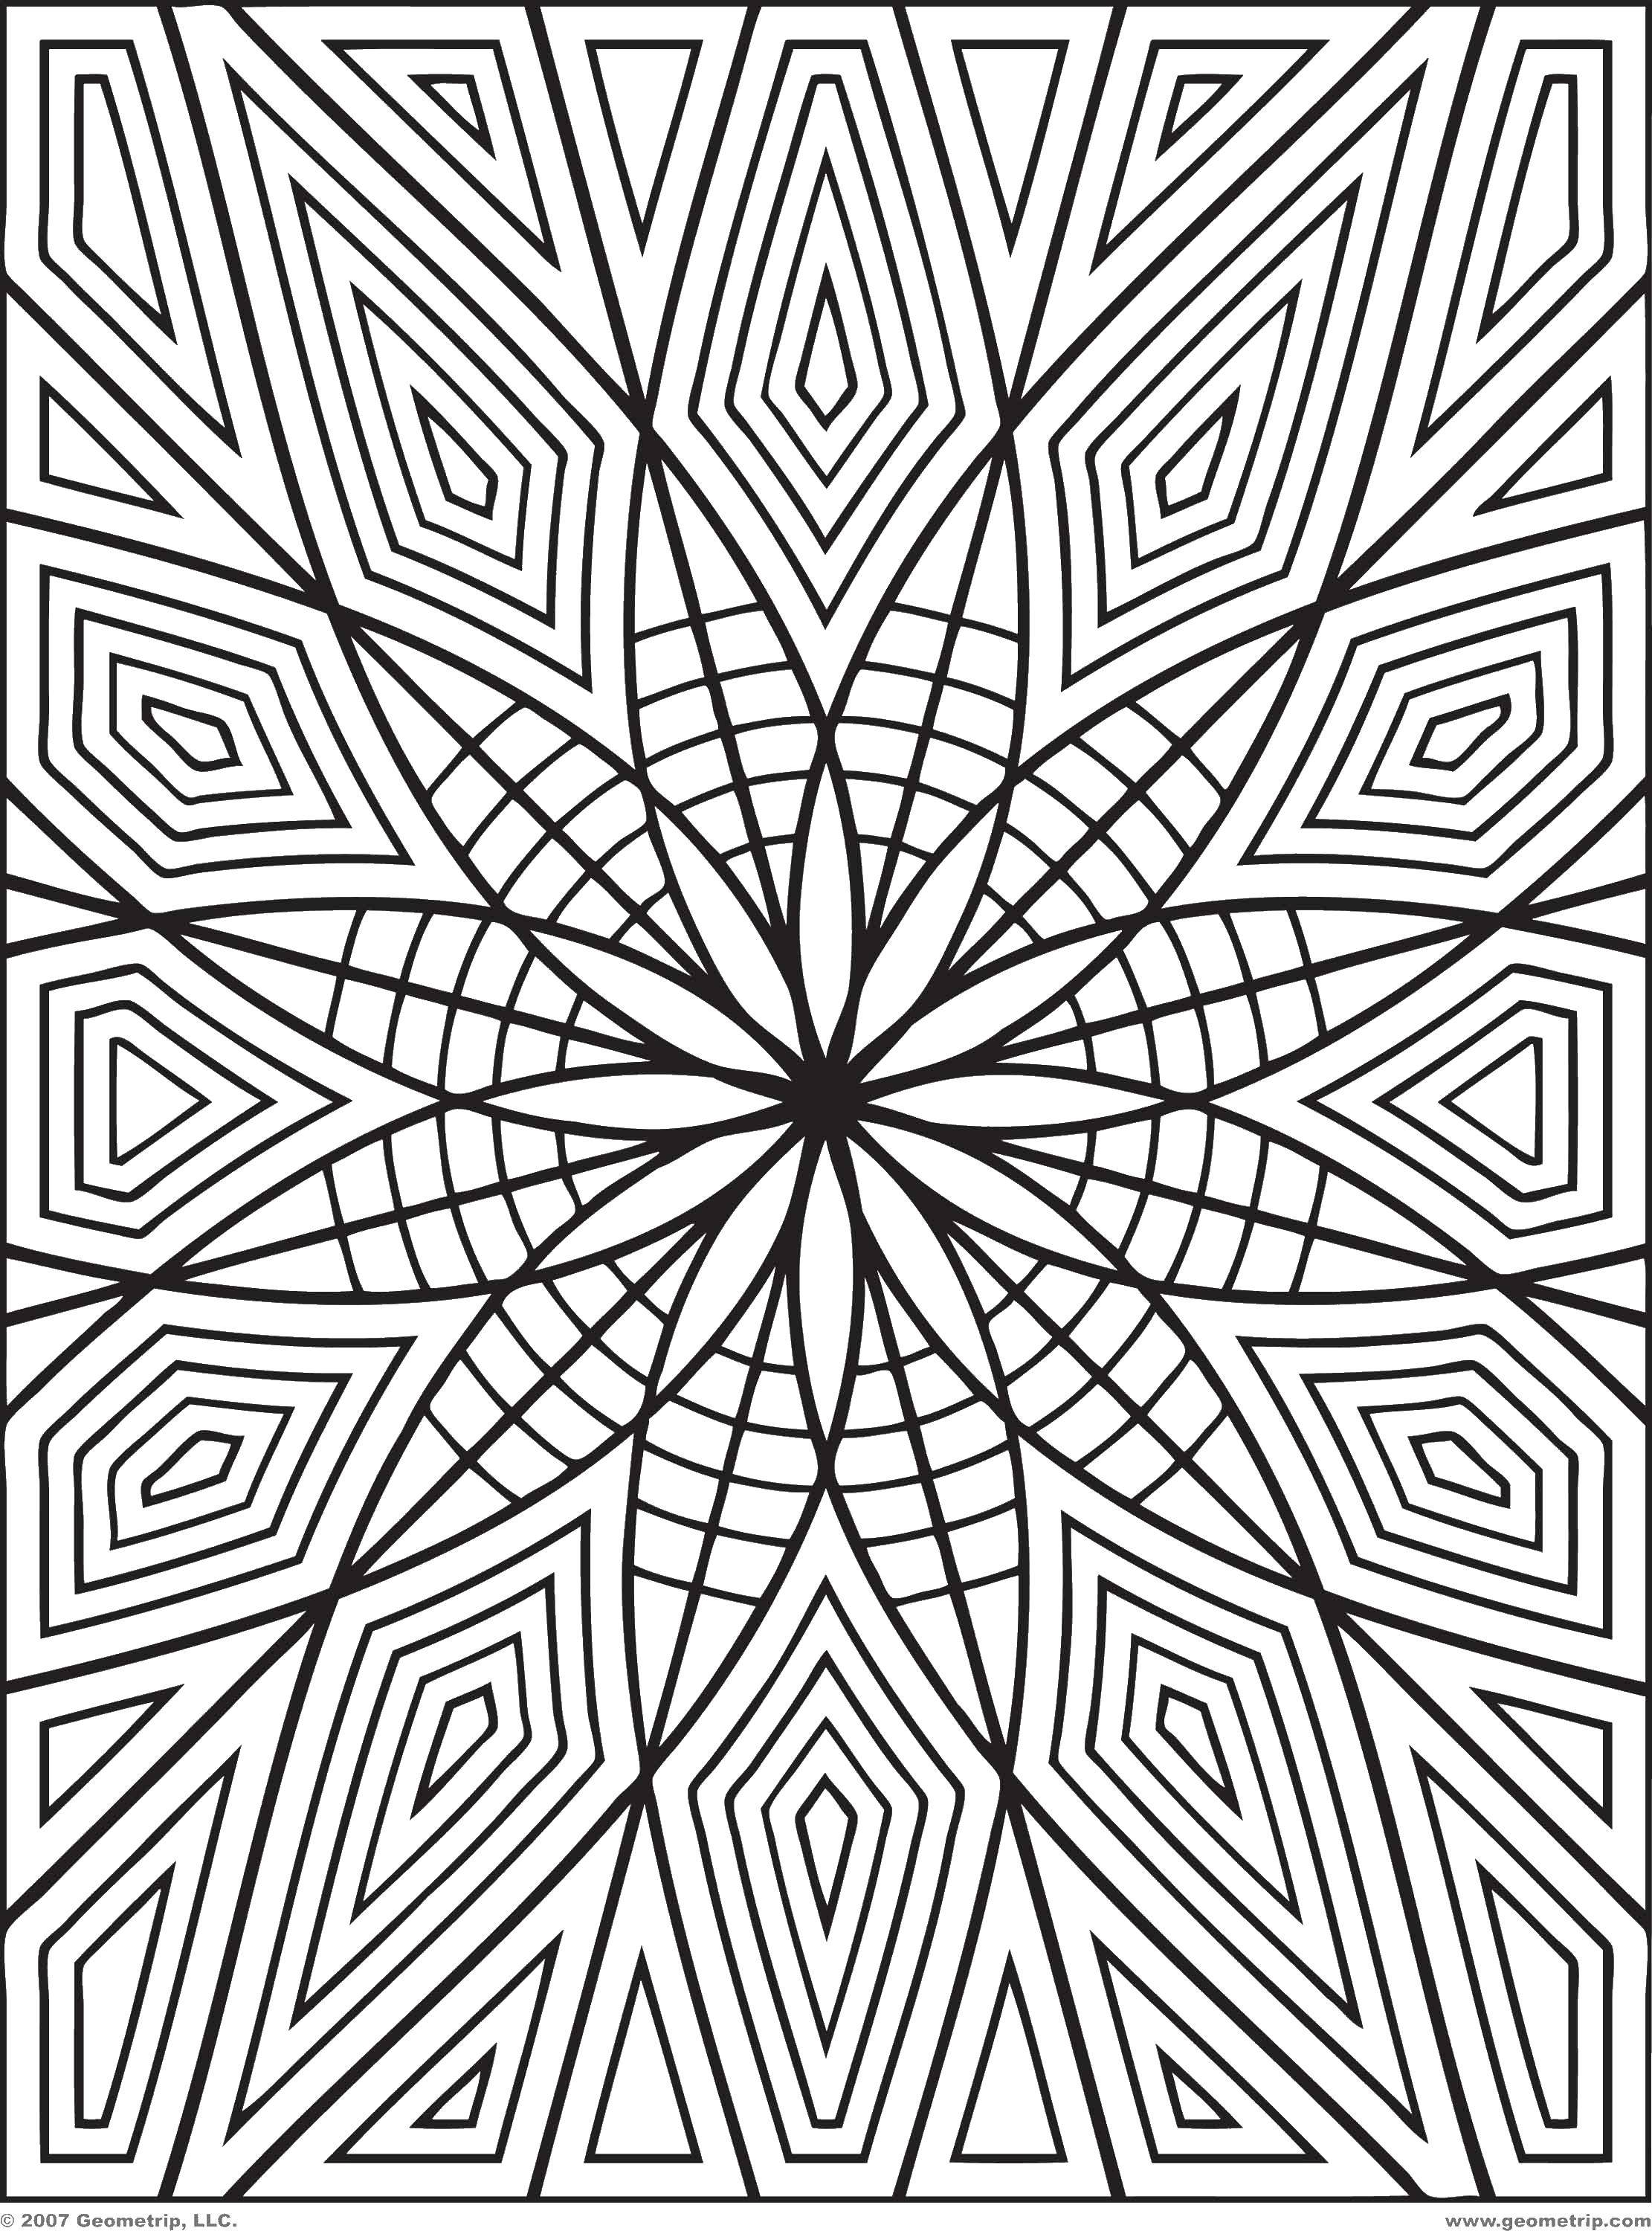 Coloring Geometric patterns around the flower. Category Patterns. Tags:  Patterns, geometric.